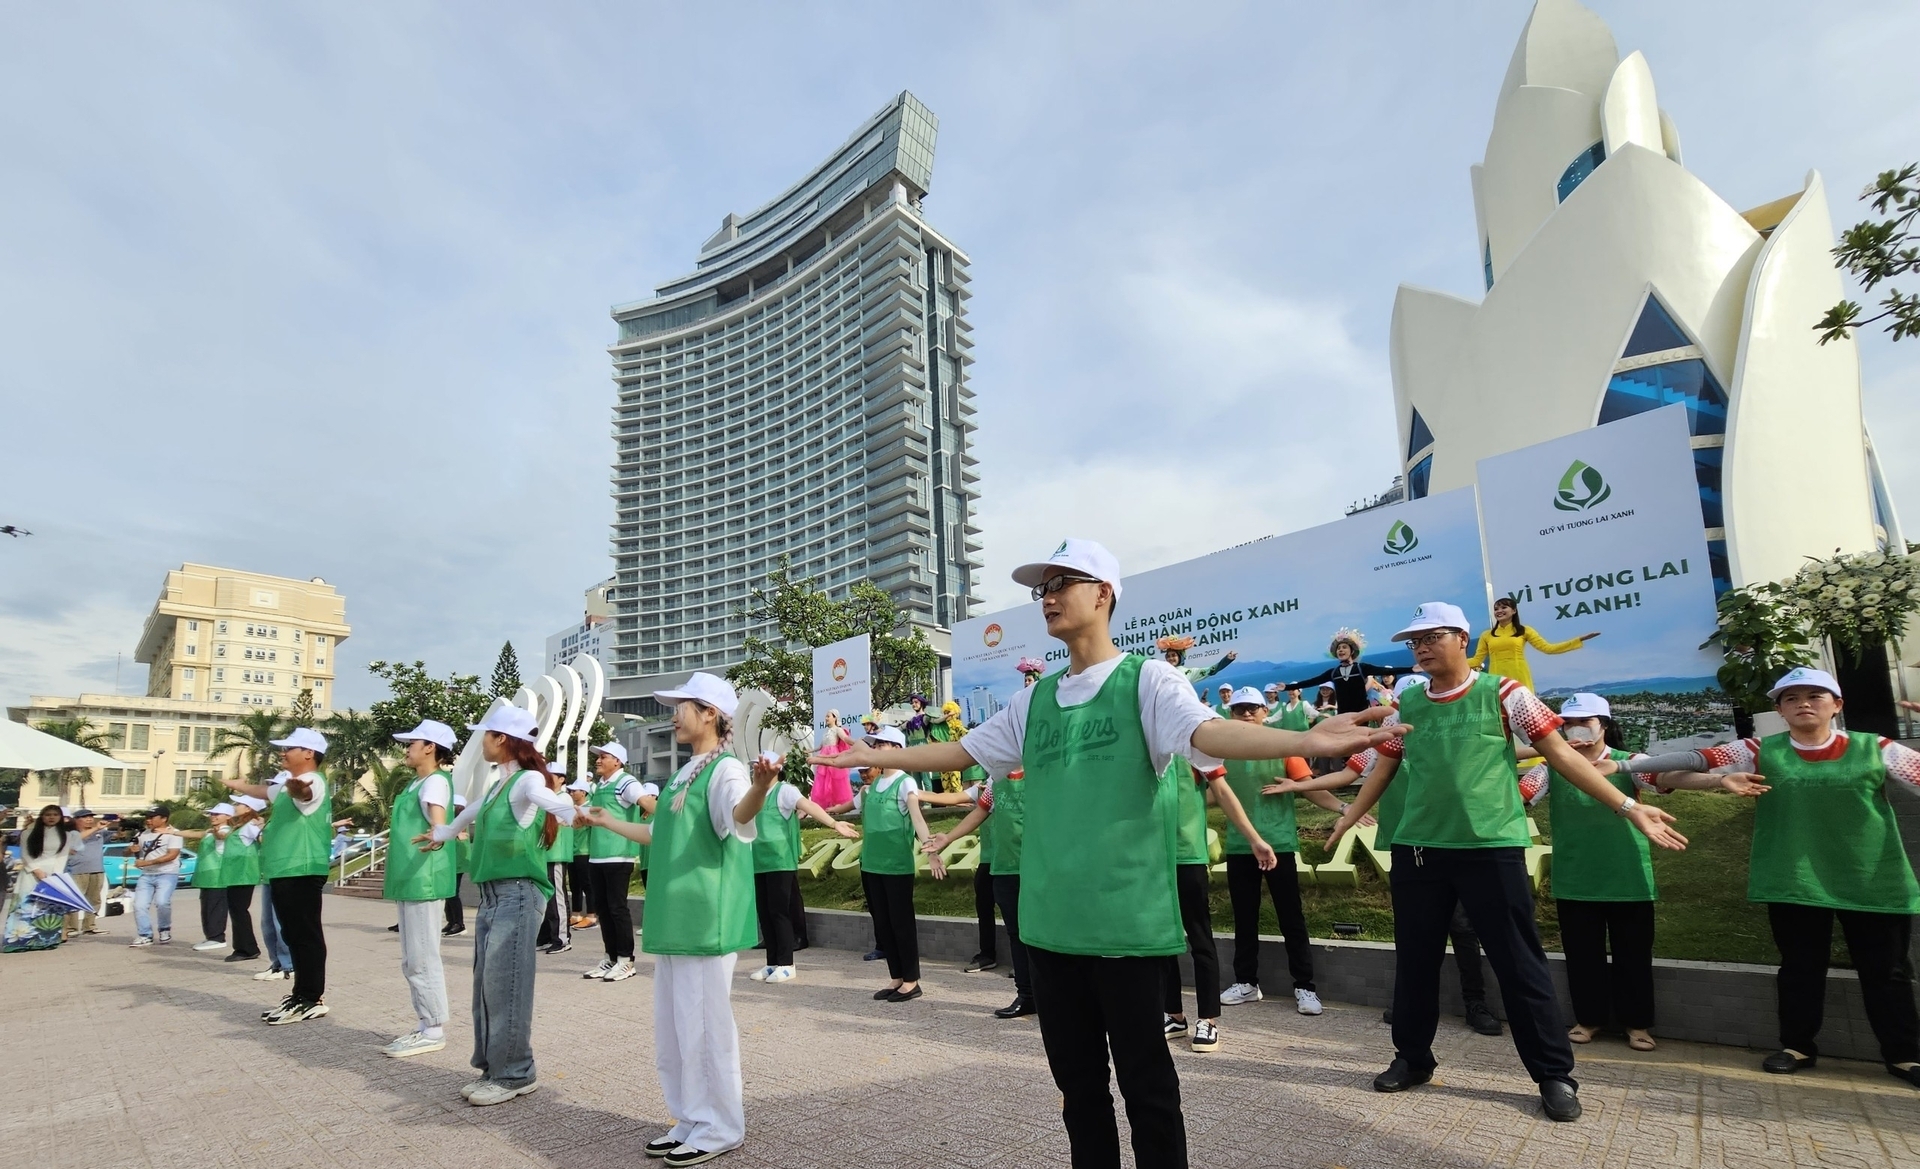 Khanh Hoa province calls on people and businesses to respond to 'Green Action - For a Green Future'. Photo: KS.